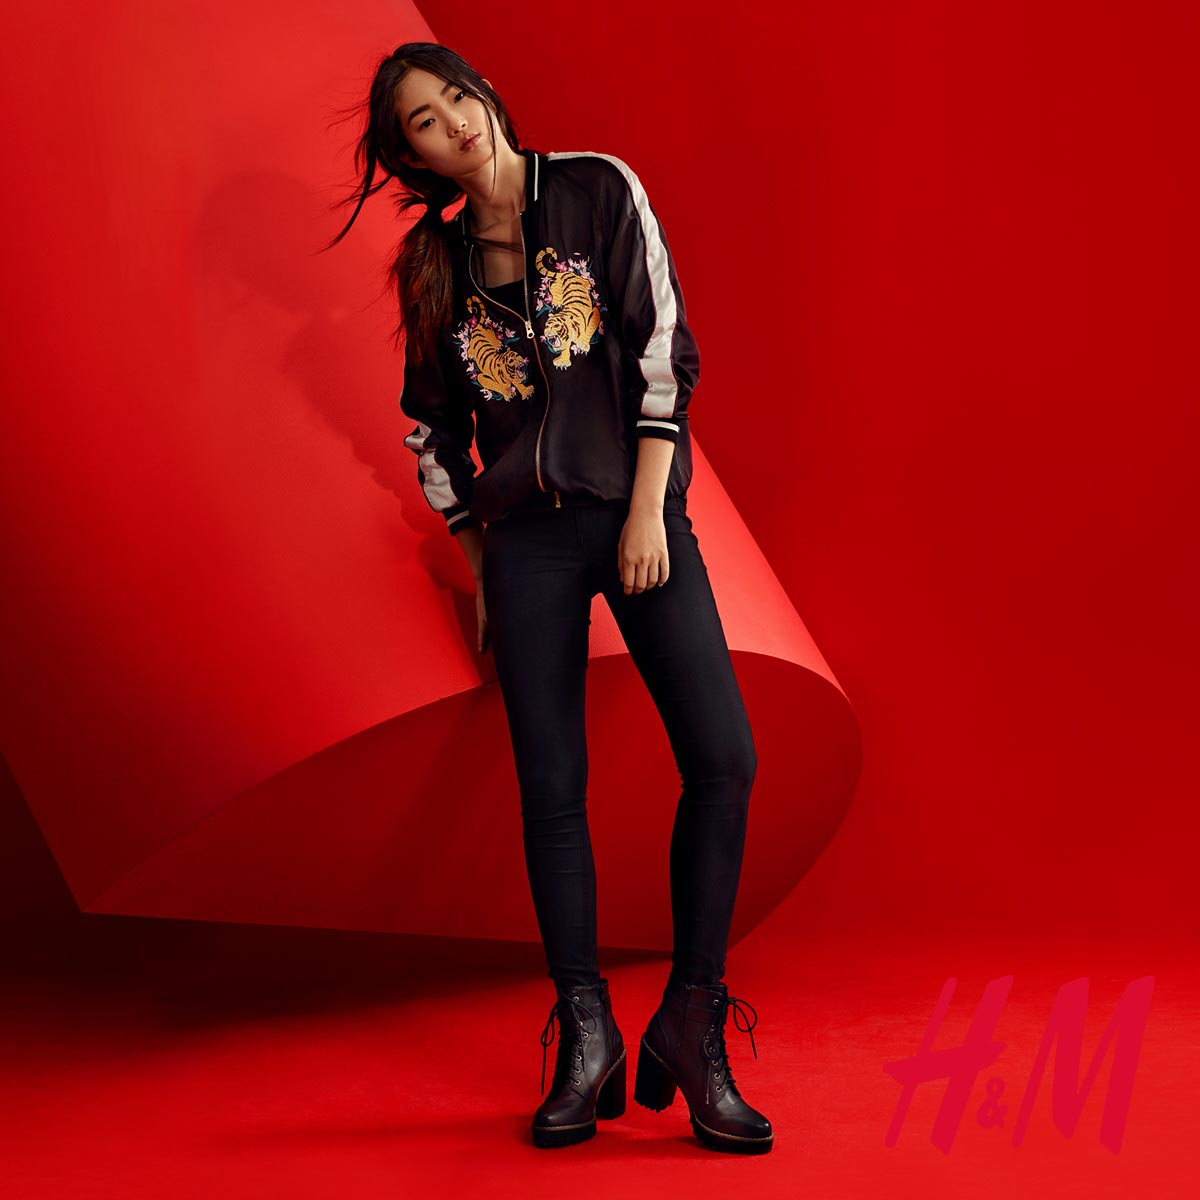 H&M’s Black Friday Sale Up to 70 off on their new collection and more